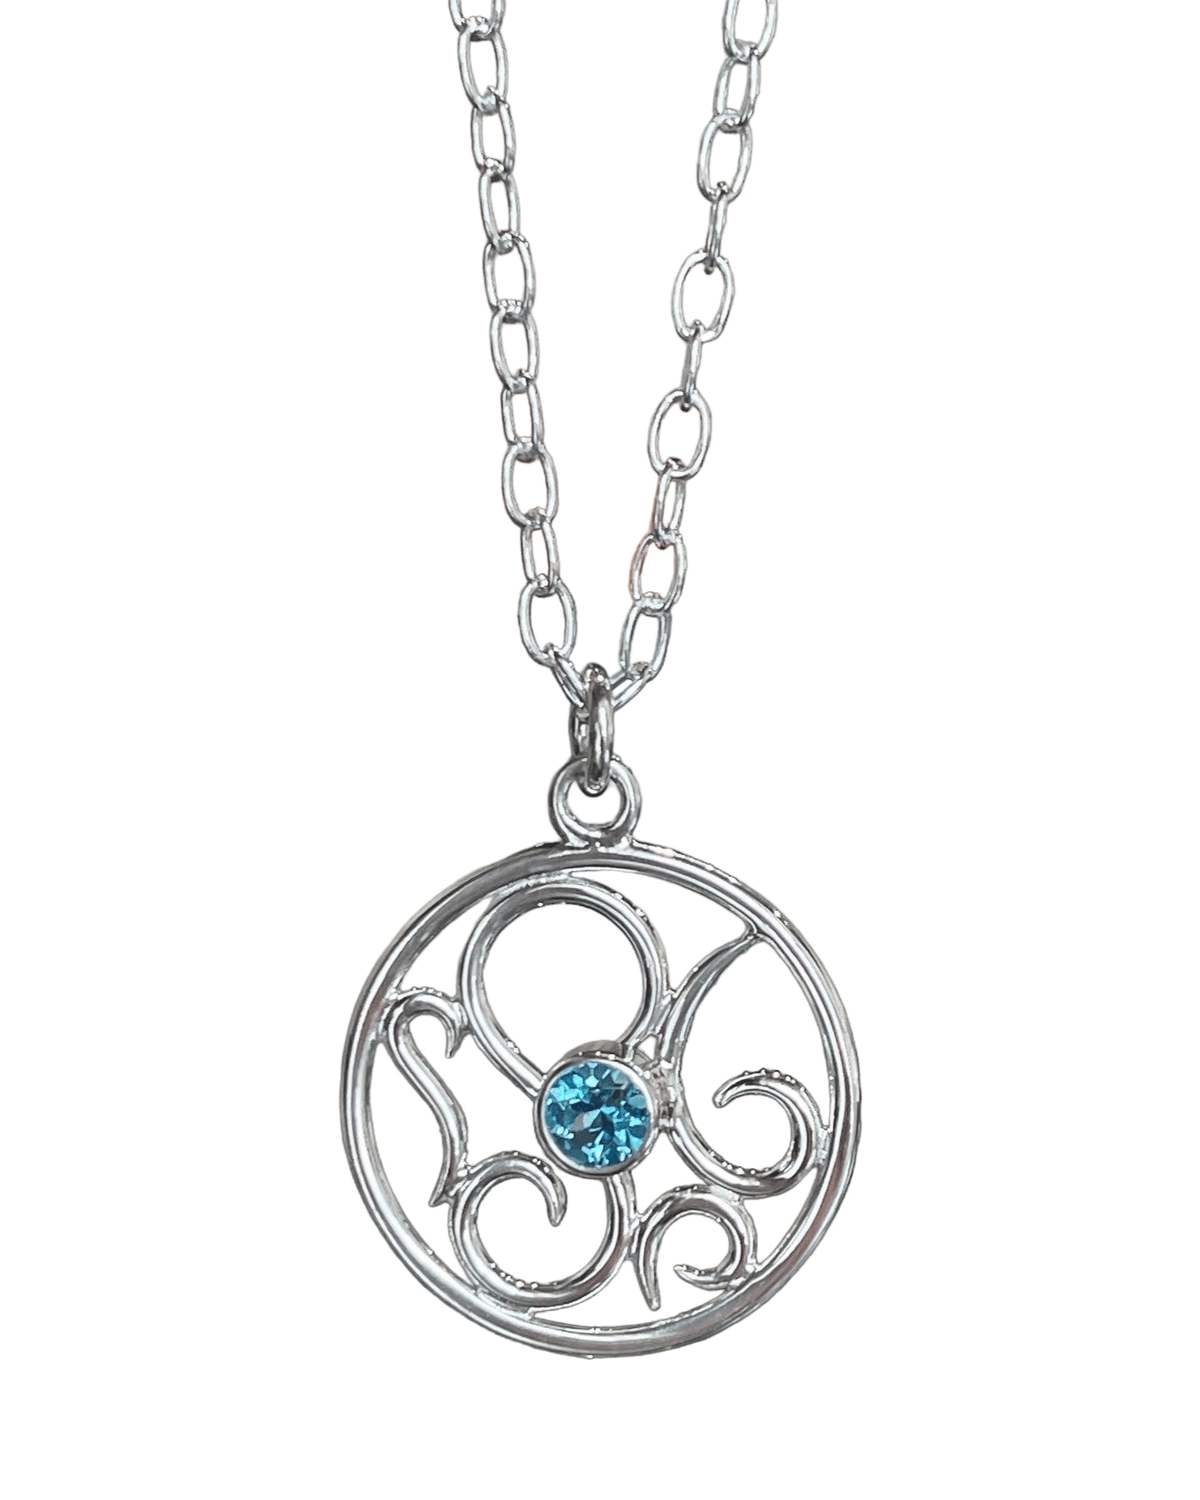 Silver Swirl Abstract Octopus Pendant with Blue Topaz